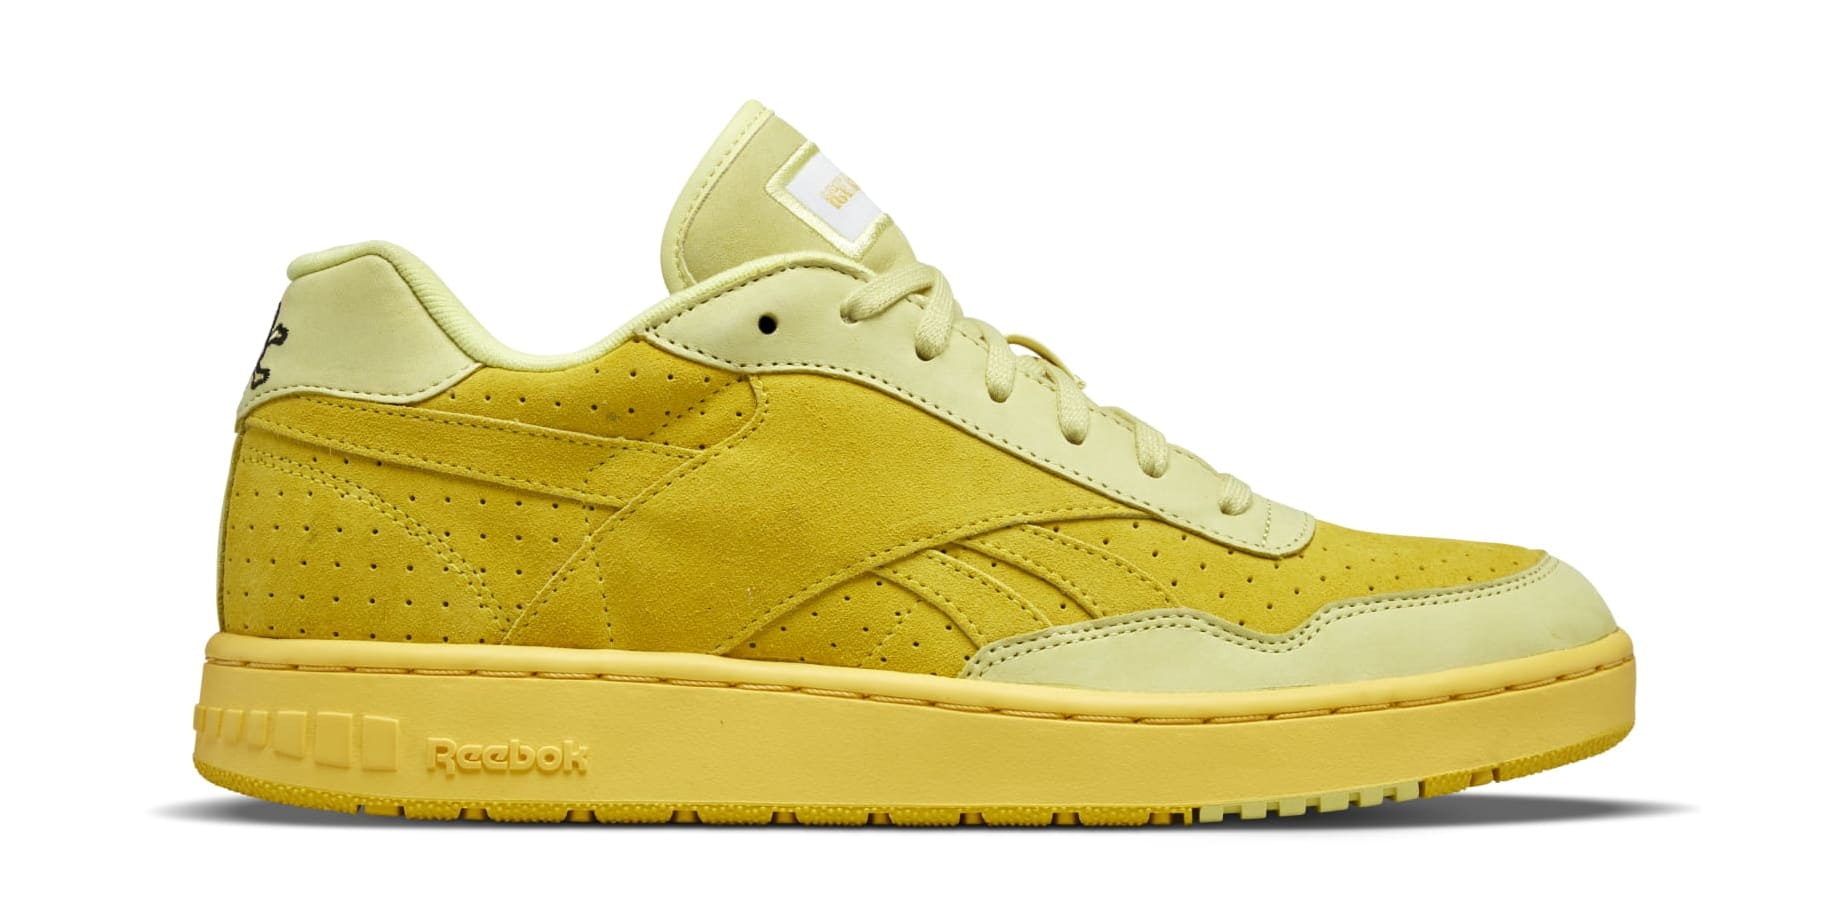 BBC x ComplexCon x Reebok BB 4600 Low "Strong Yellow"